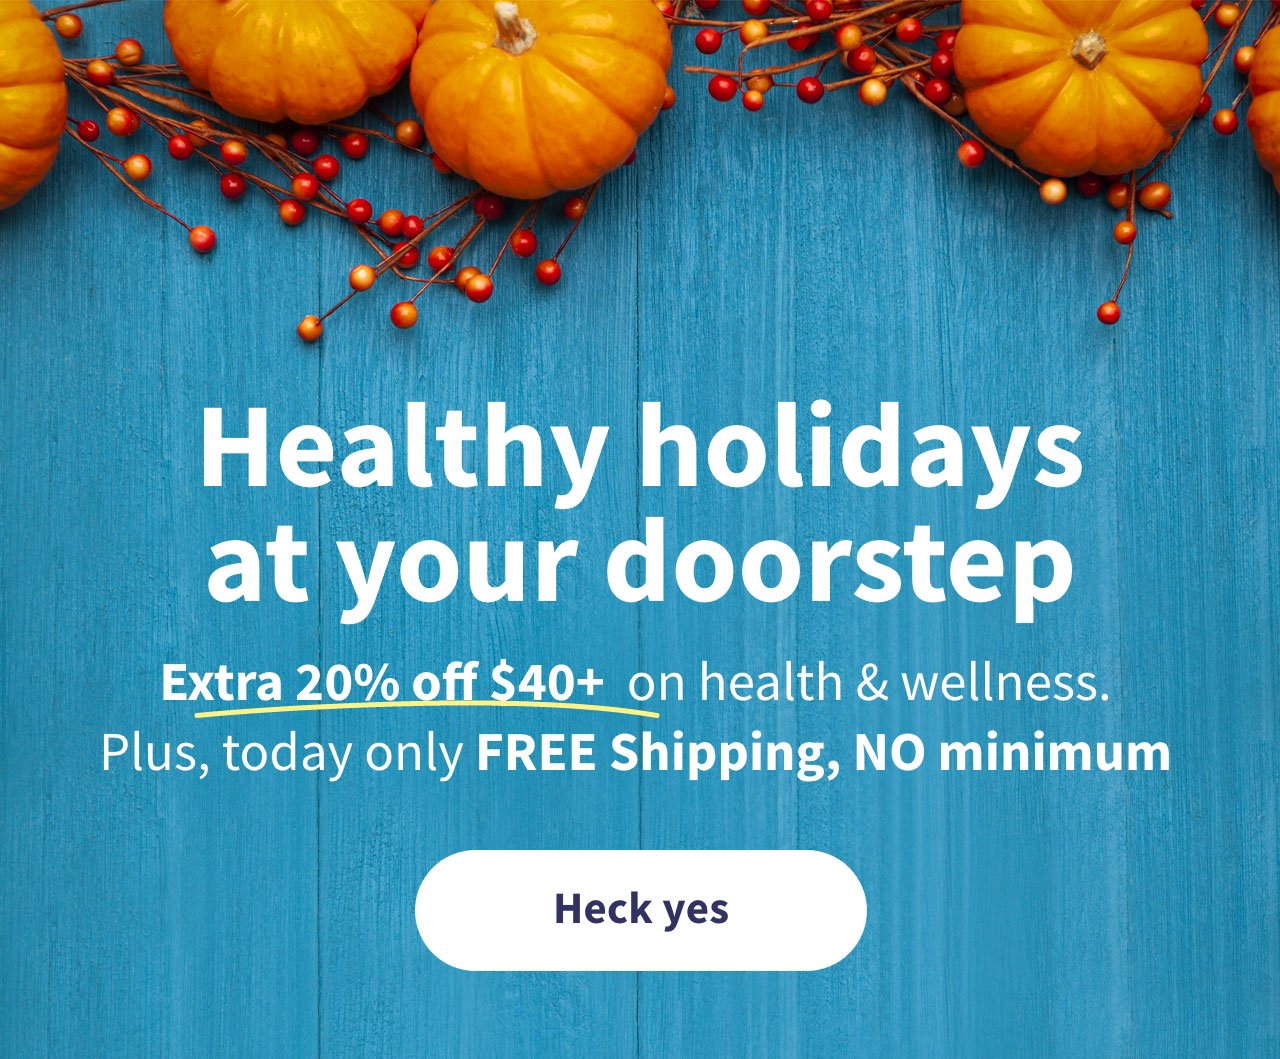 Healthy holidays at your doorstep. Extra 20% off $40+ health & wellness. Plus, today only FREE Shipping, NO minimum. Heck, yes.